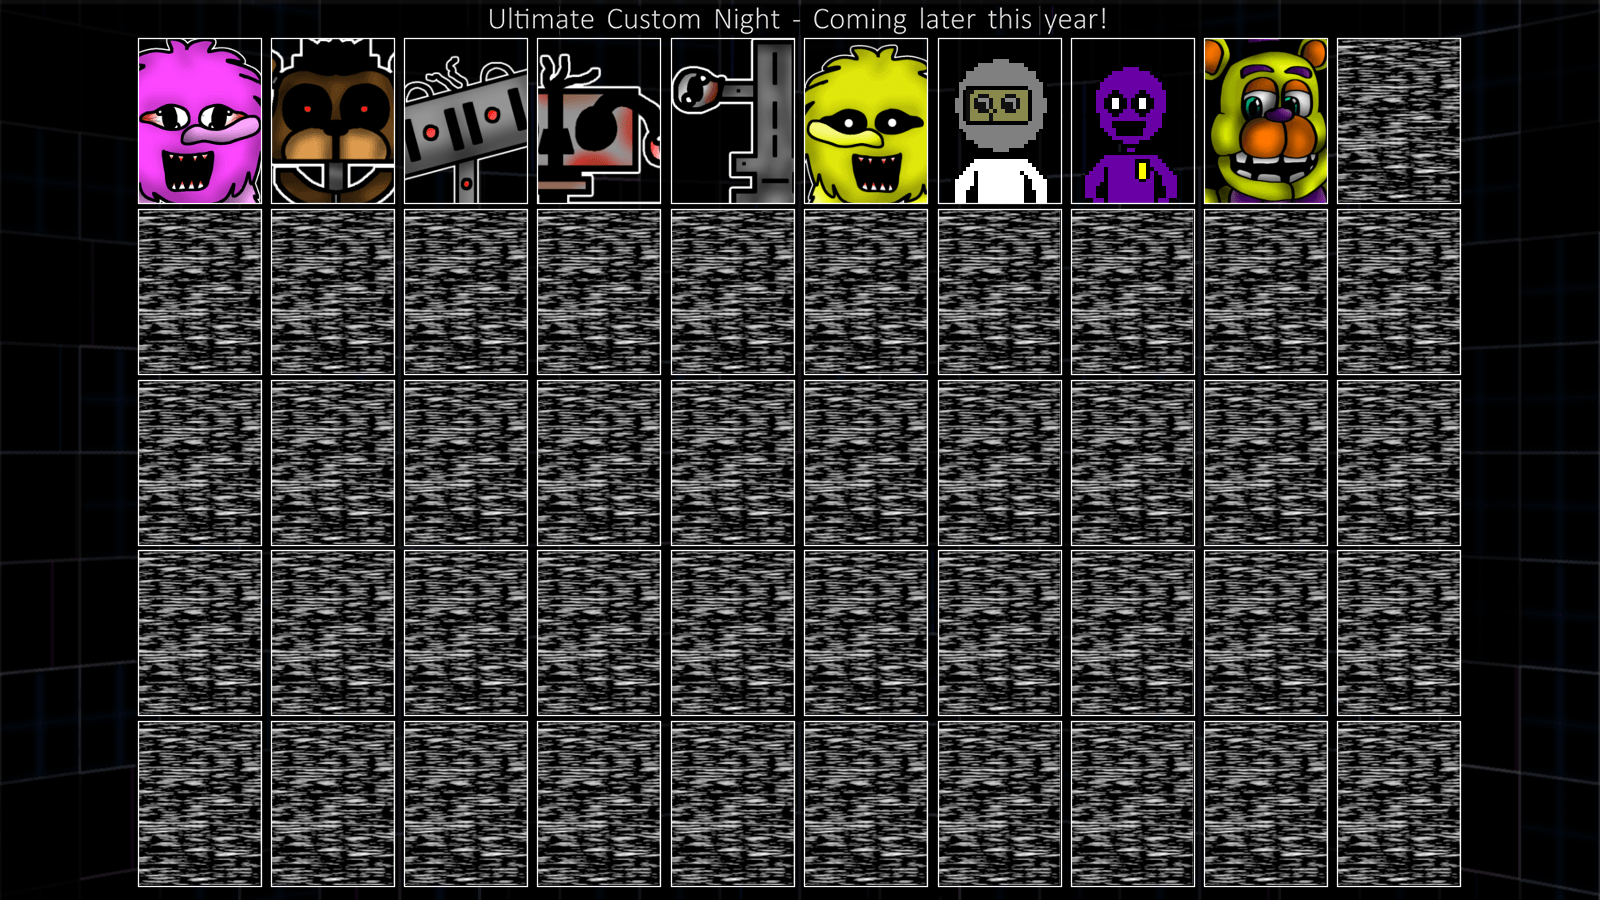 The Ultimate Custom Night but with characters from my fangame